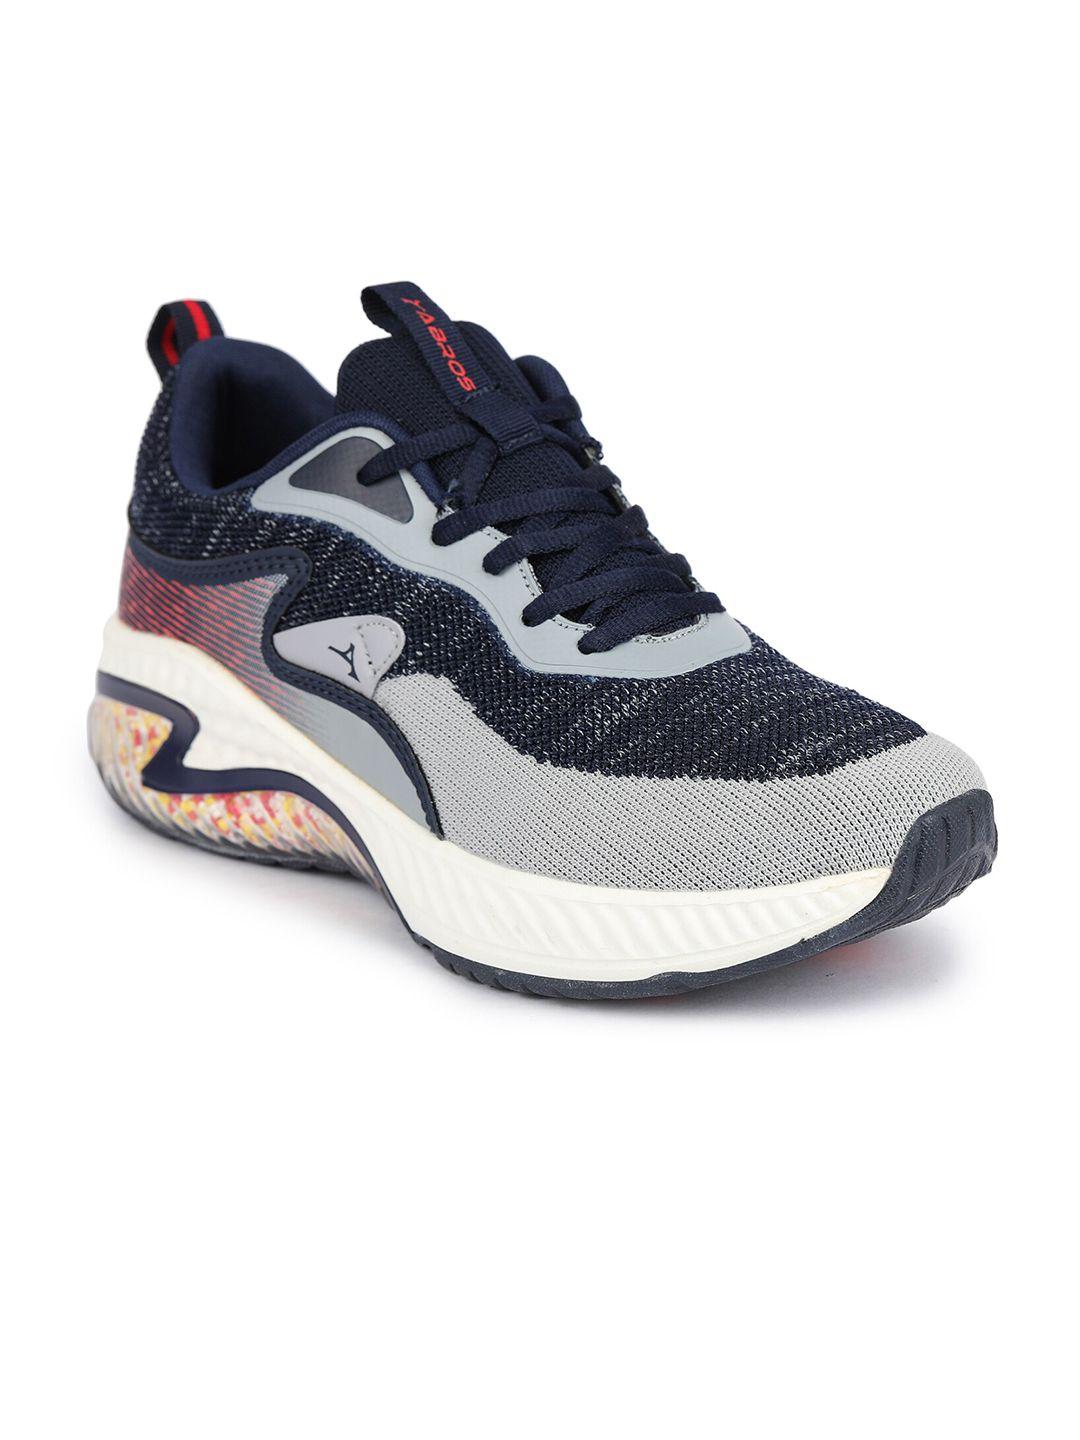 abros men navy blue mesh all rounder running shoes with air technology